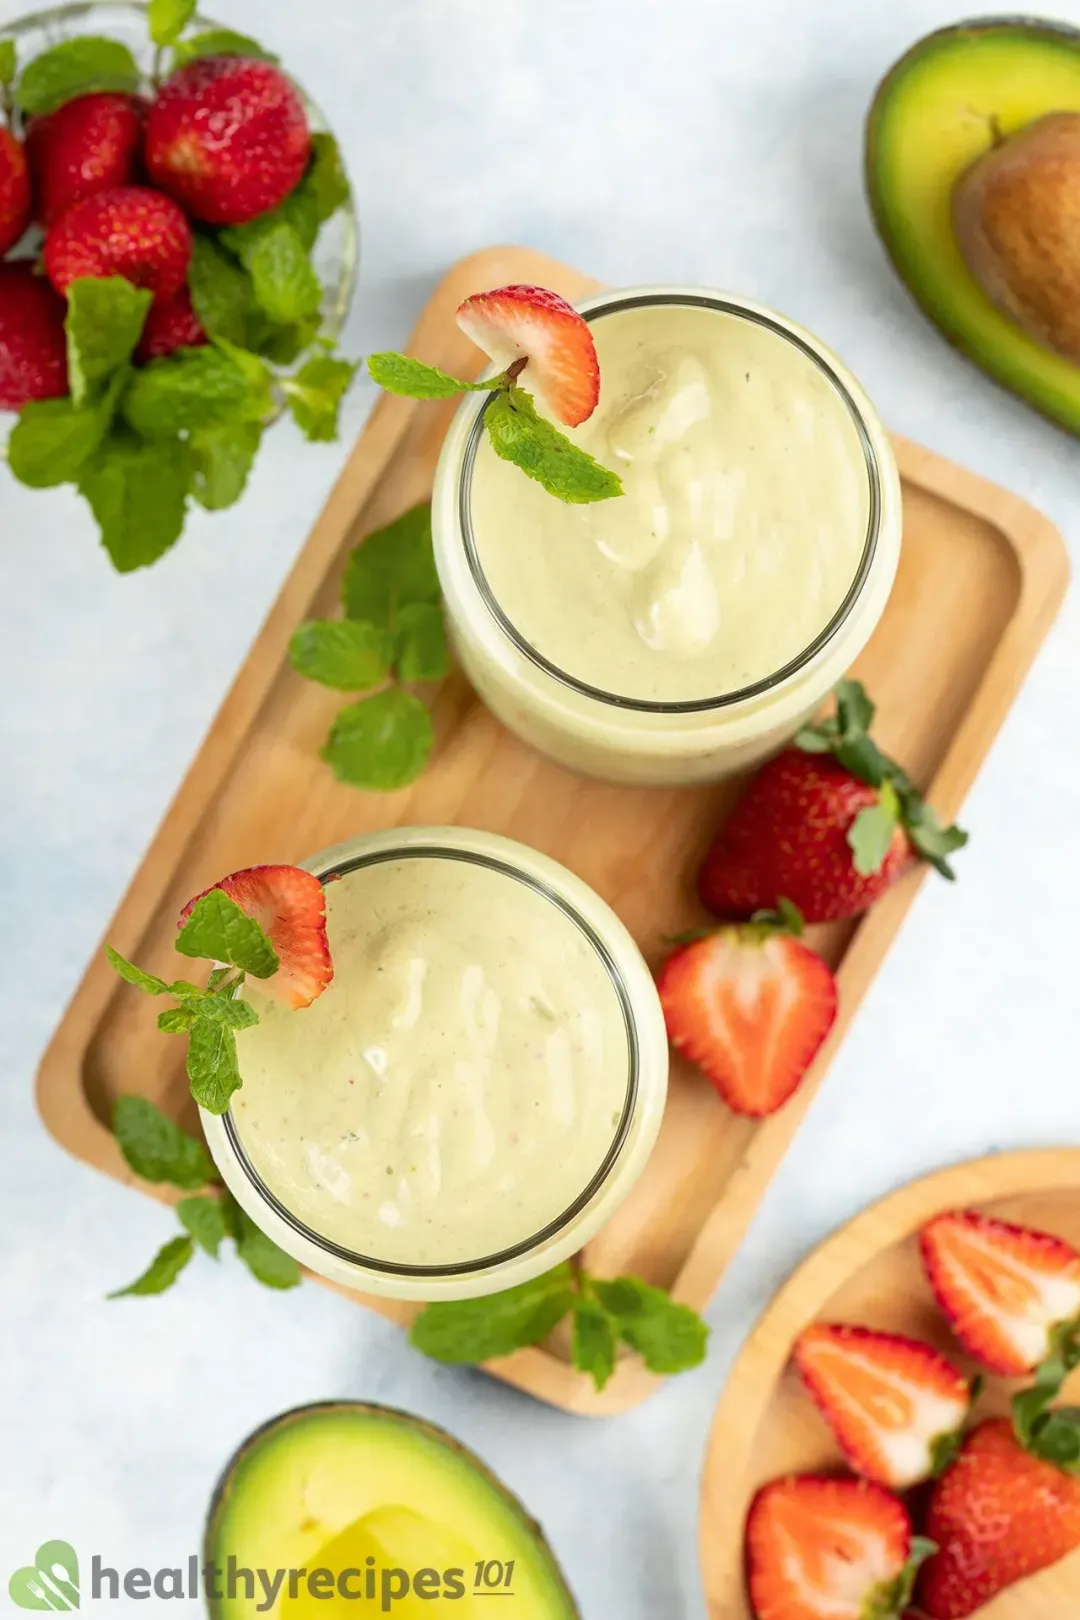 Is Strawberry Avocado Smoothie Healthy